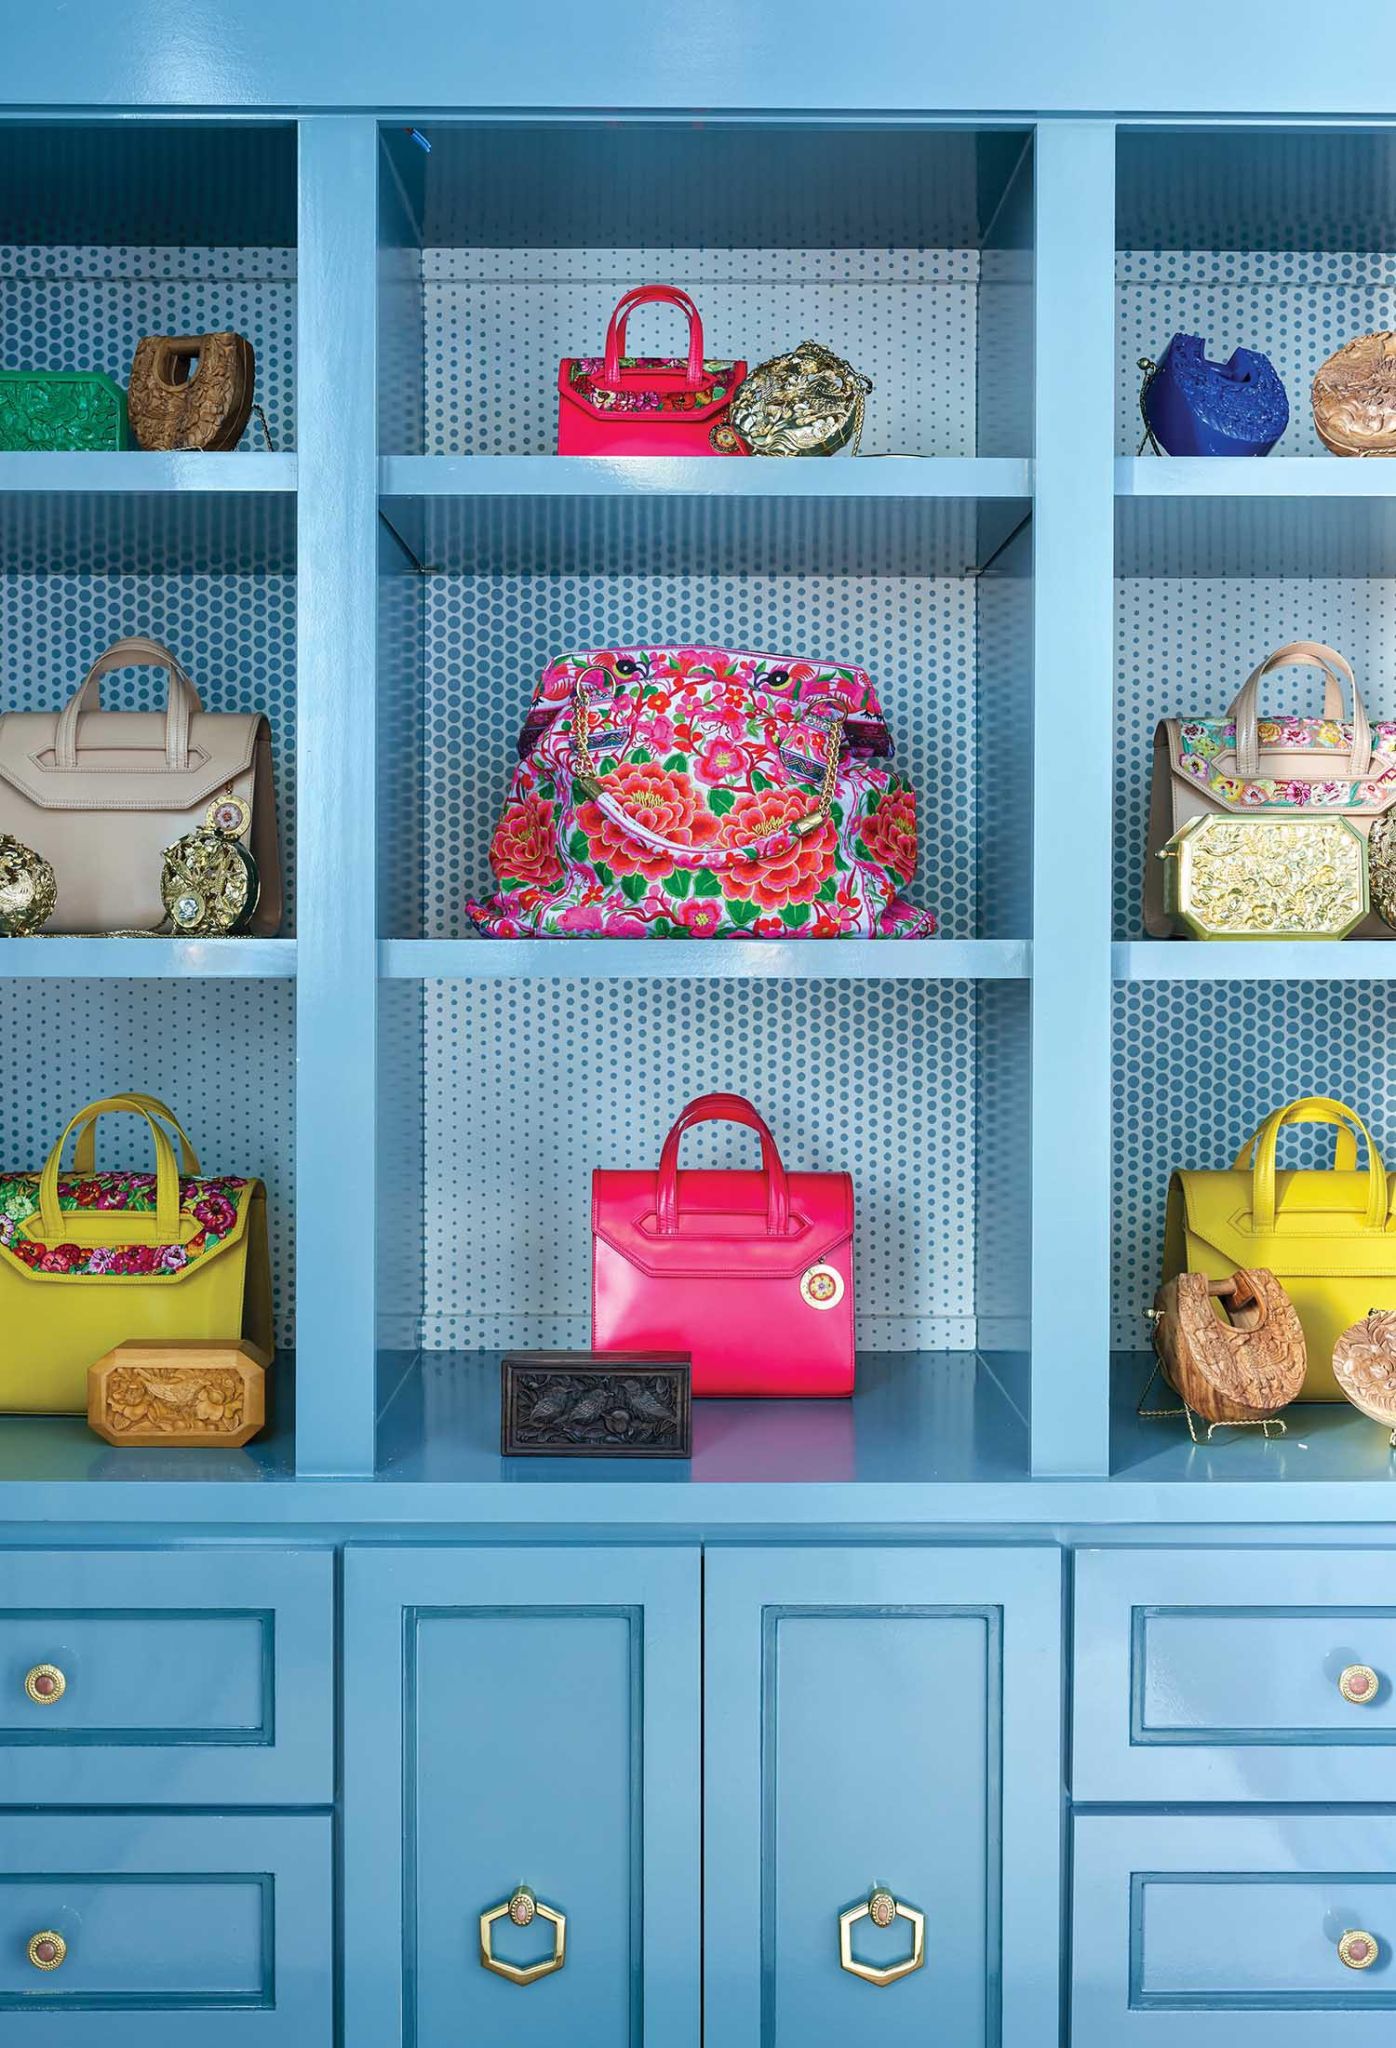 Blue cabinets hold colorful handbags.